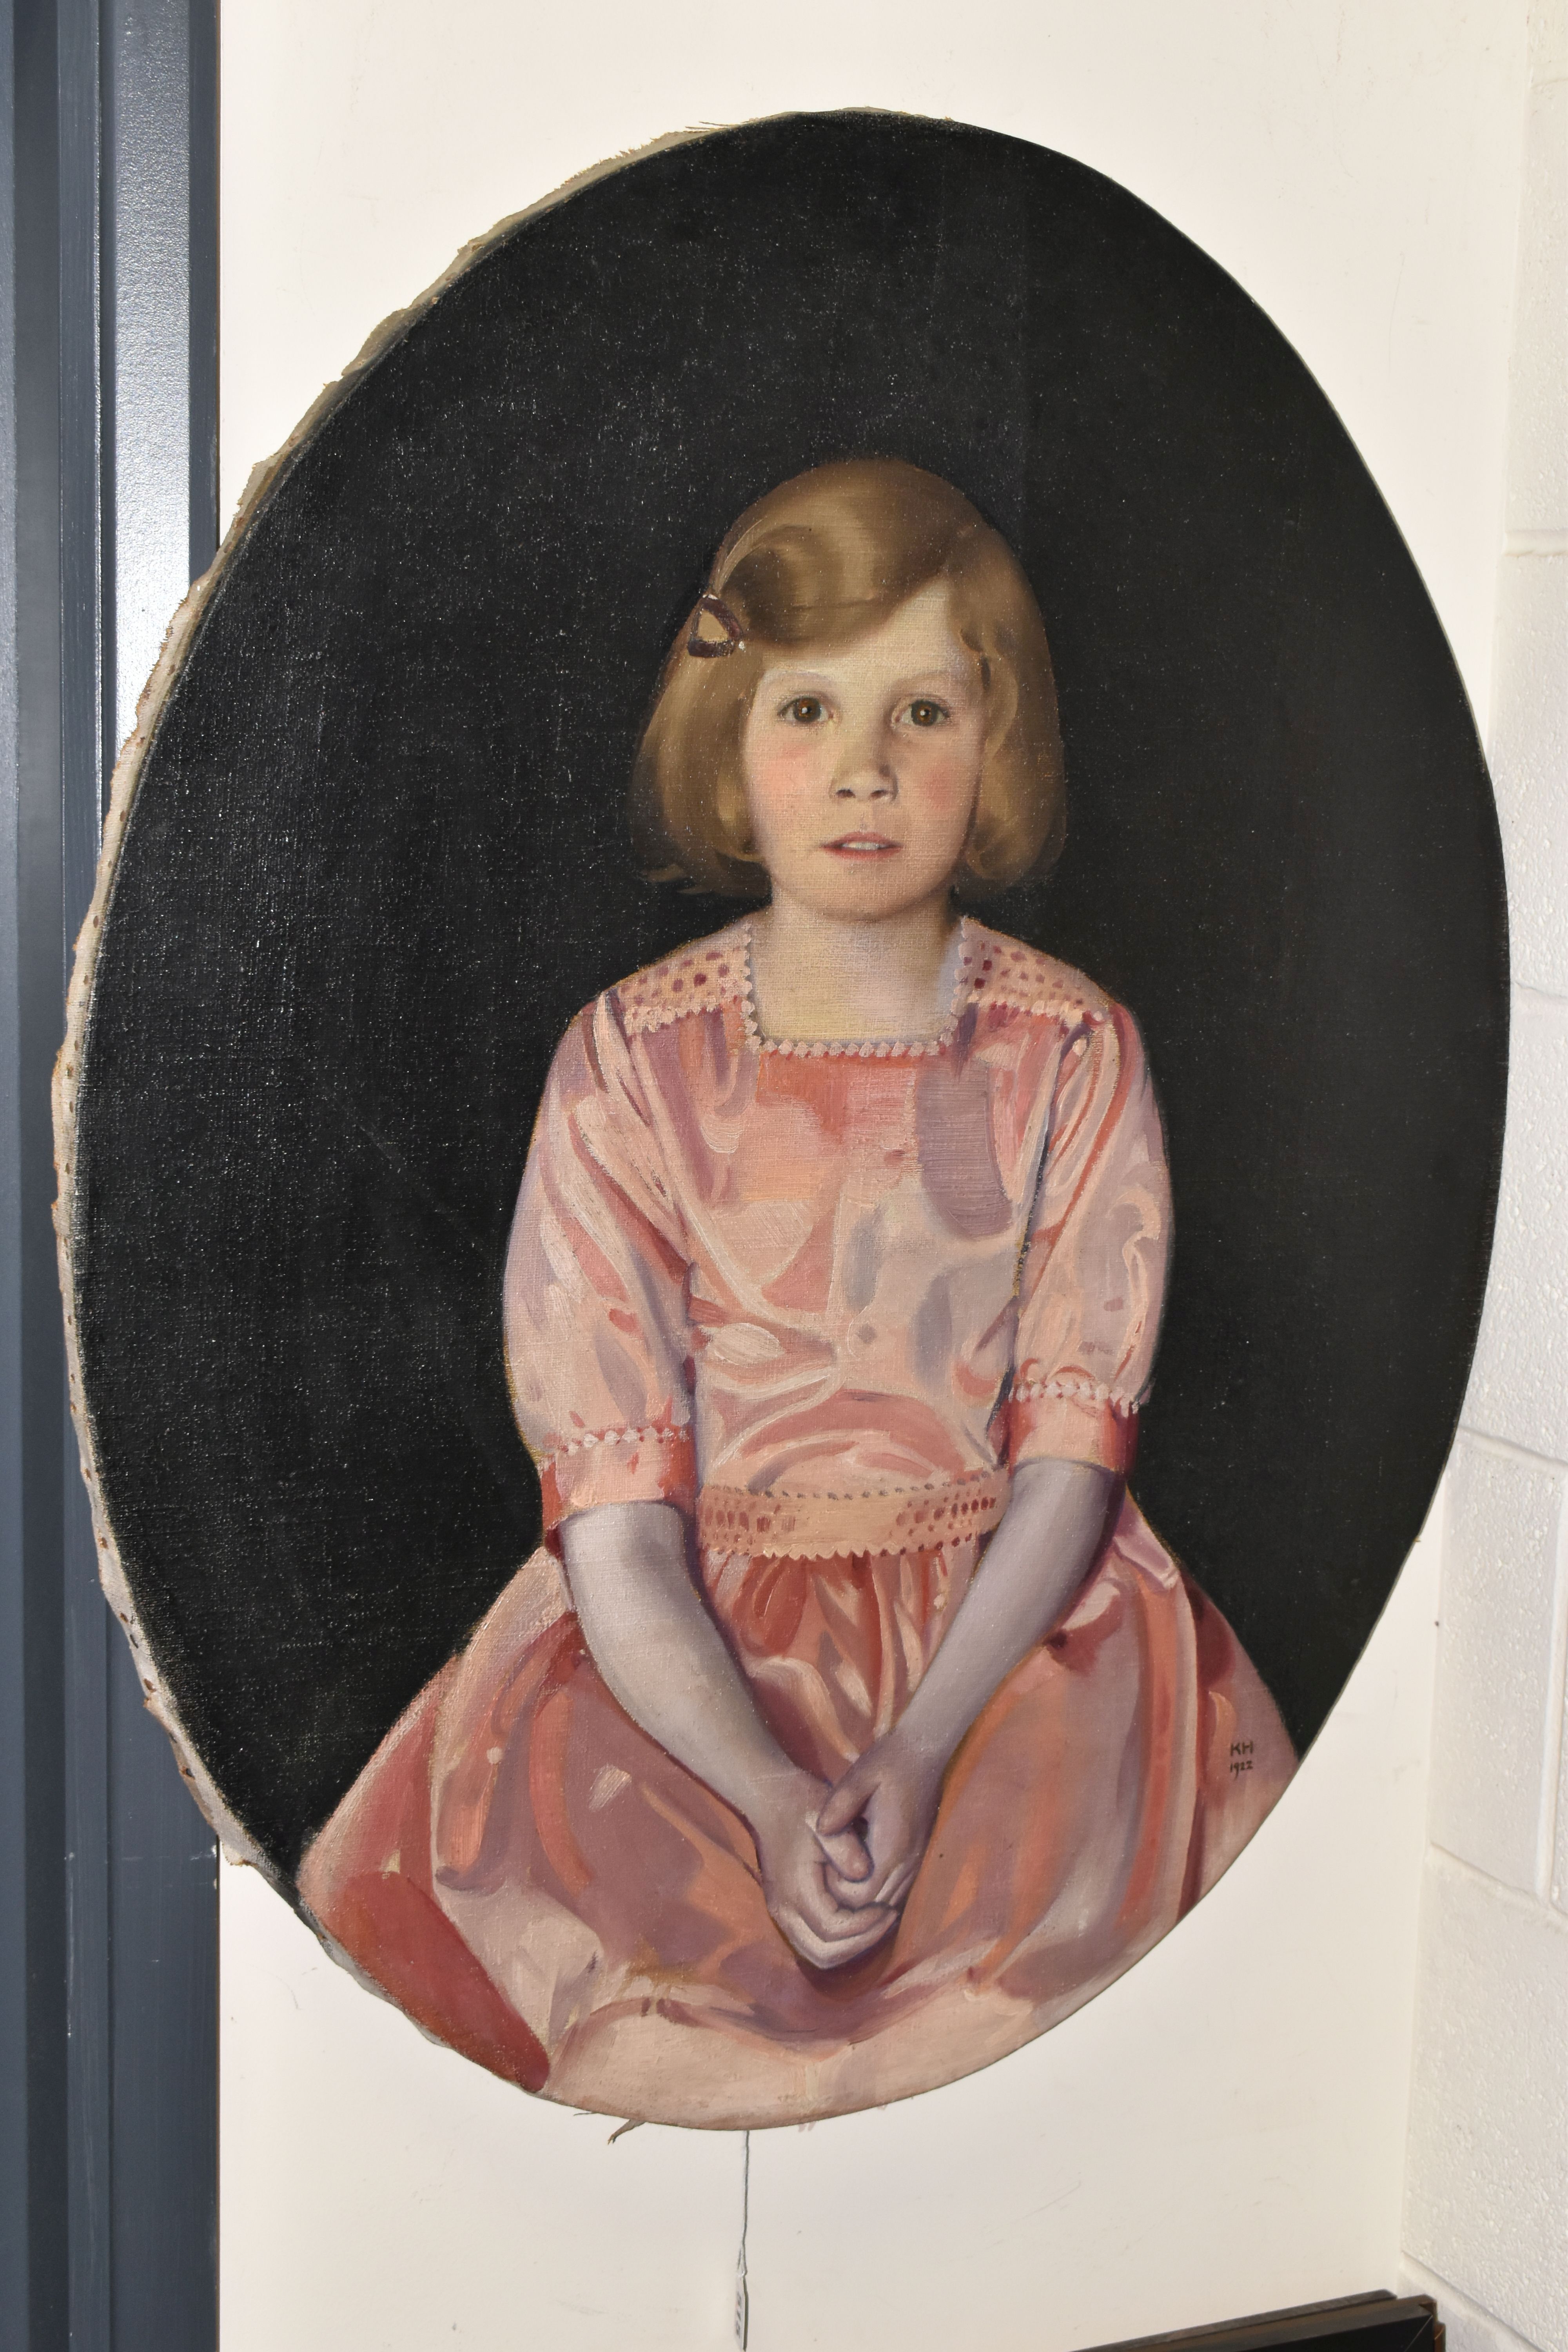 AN EARLY 20TH CENTURY PORTRAIT OF A YOUNG GIRL, the portrait depicts a seated girl wearing a pink